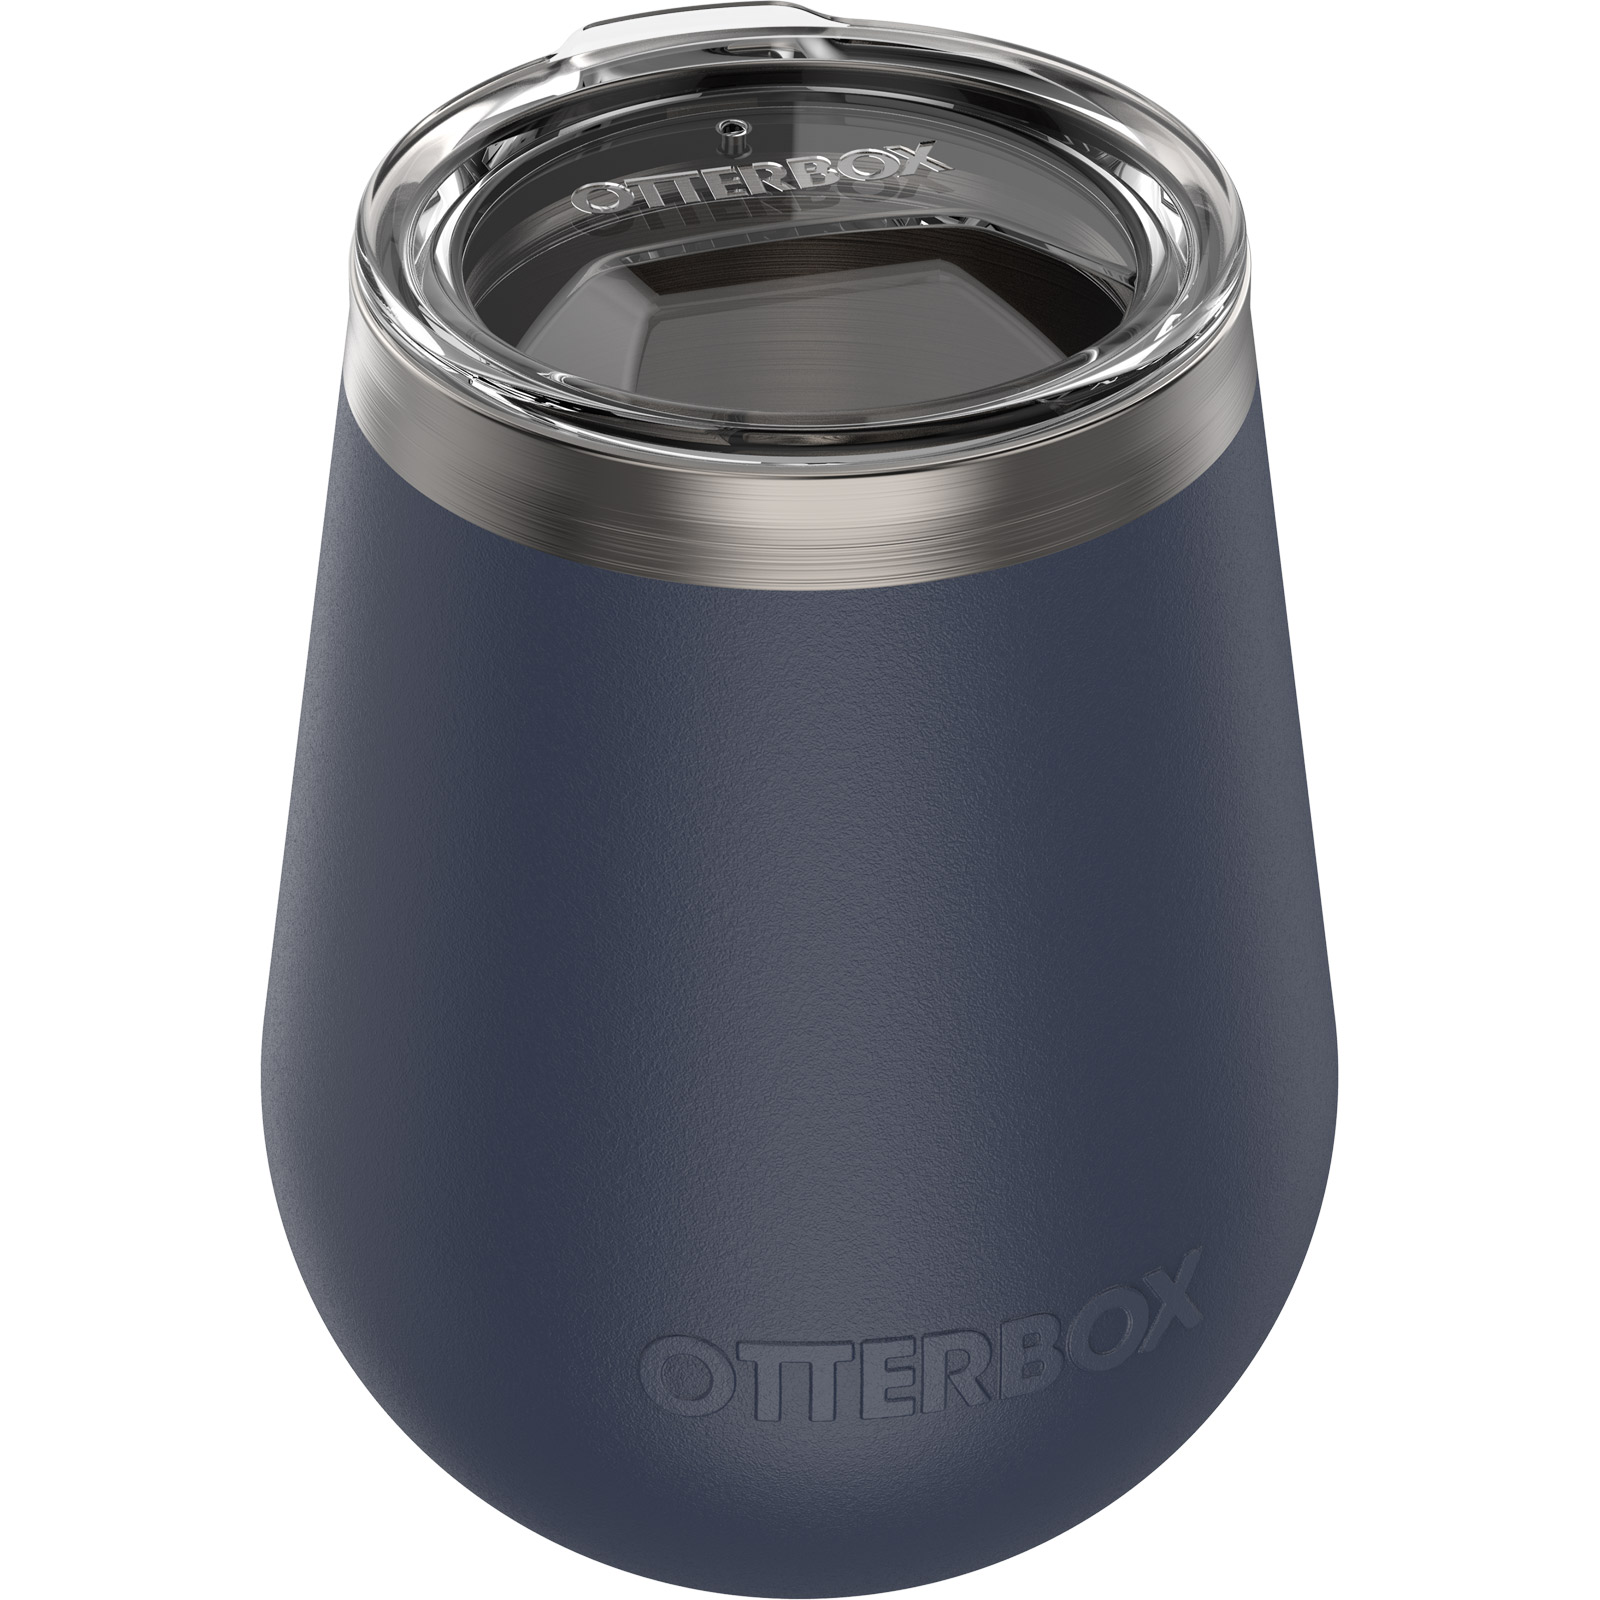 Otterbox® Elevation® Stainless Steel Tumbler - 10 oz.